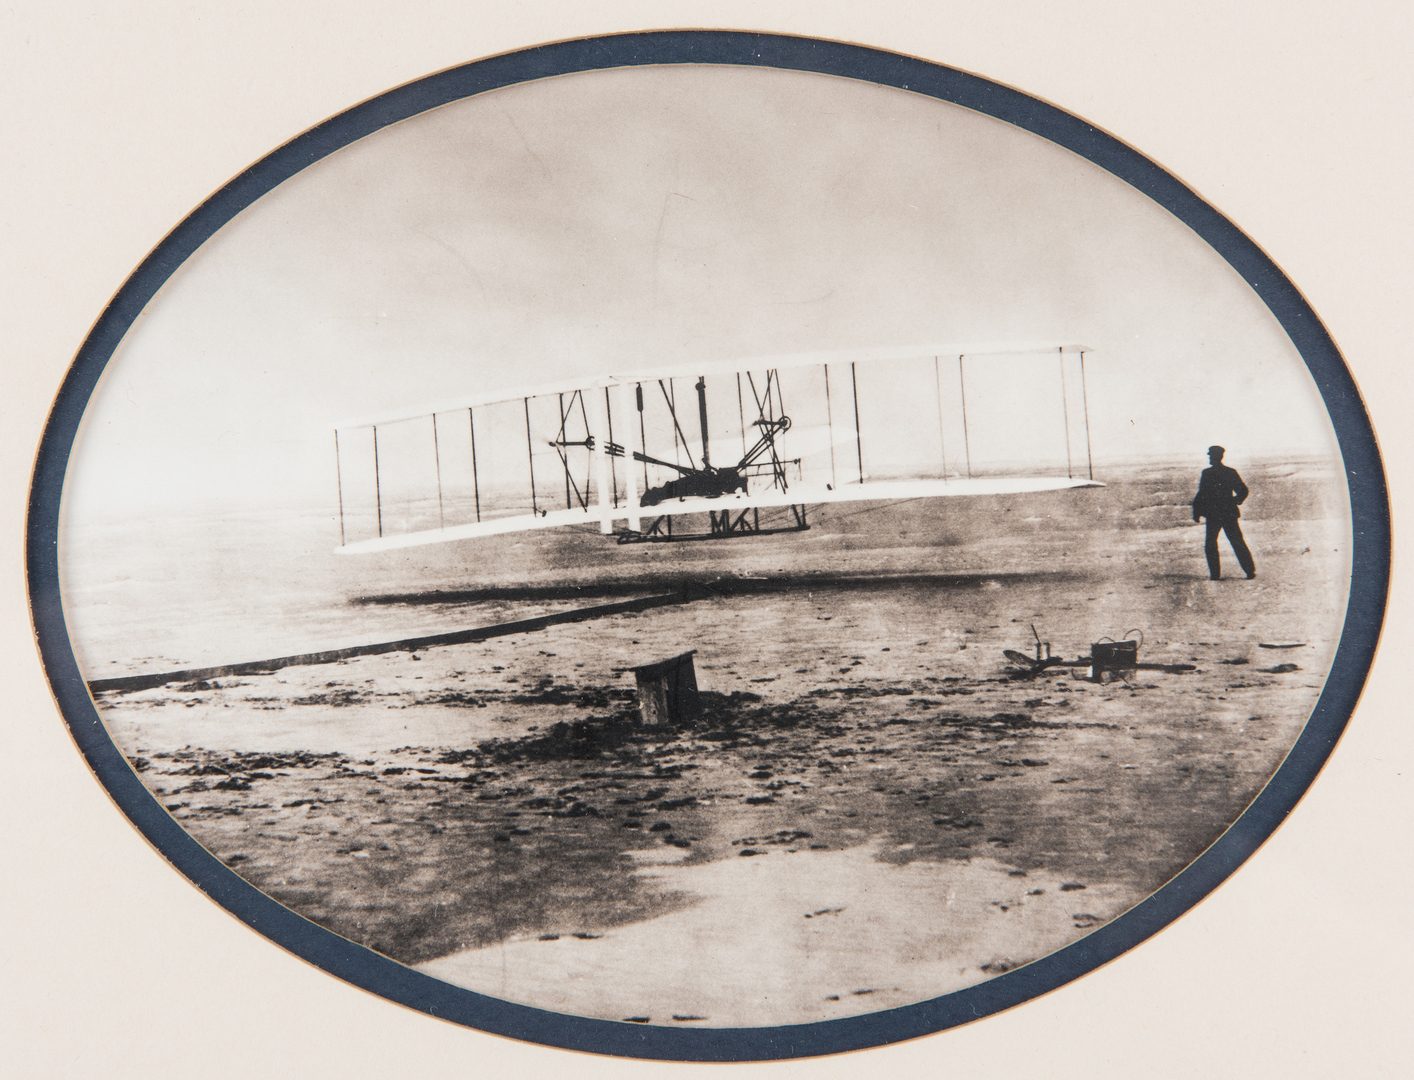 Lot 712: Orville Wright Signed Check & Photograph